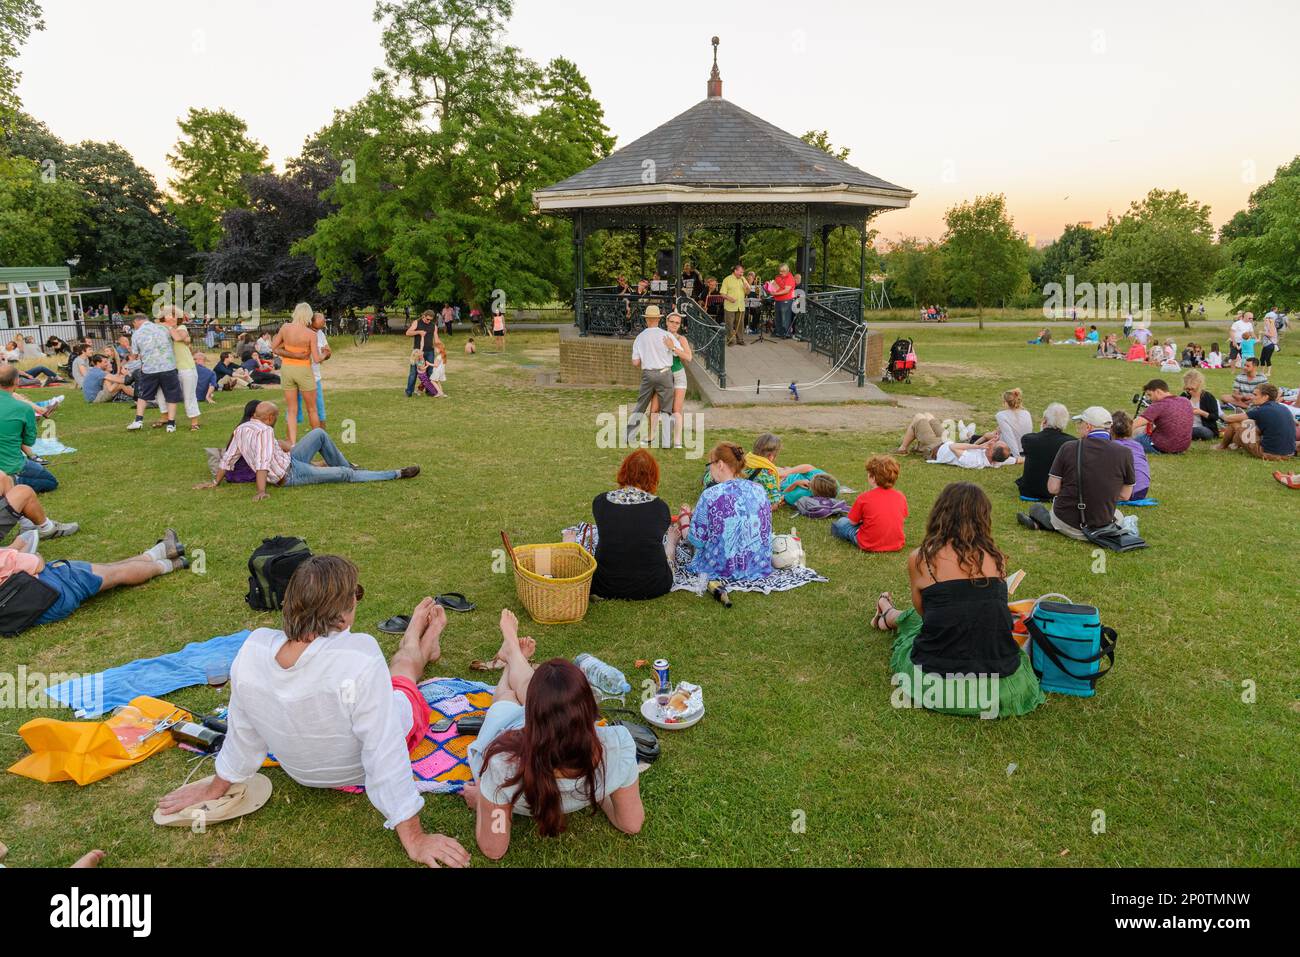 People listening to live music at the Parliament Hill bandstand in Hampstead Heath on a summer evening, London, England, UK Stock Photo